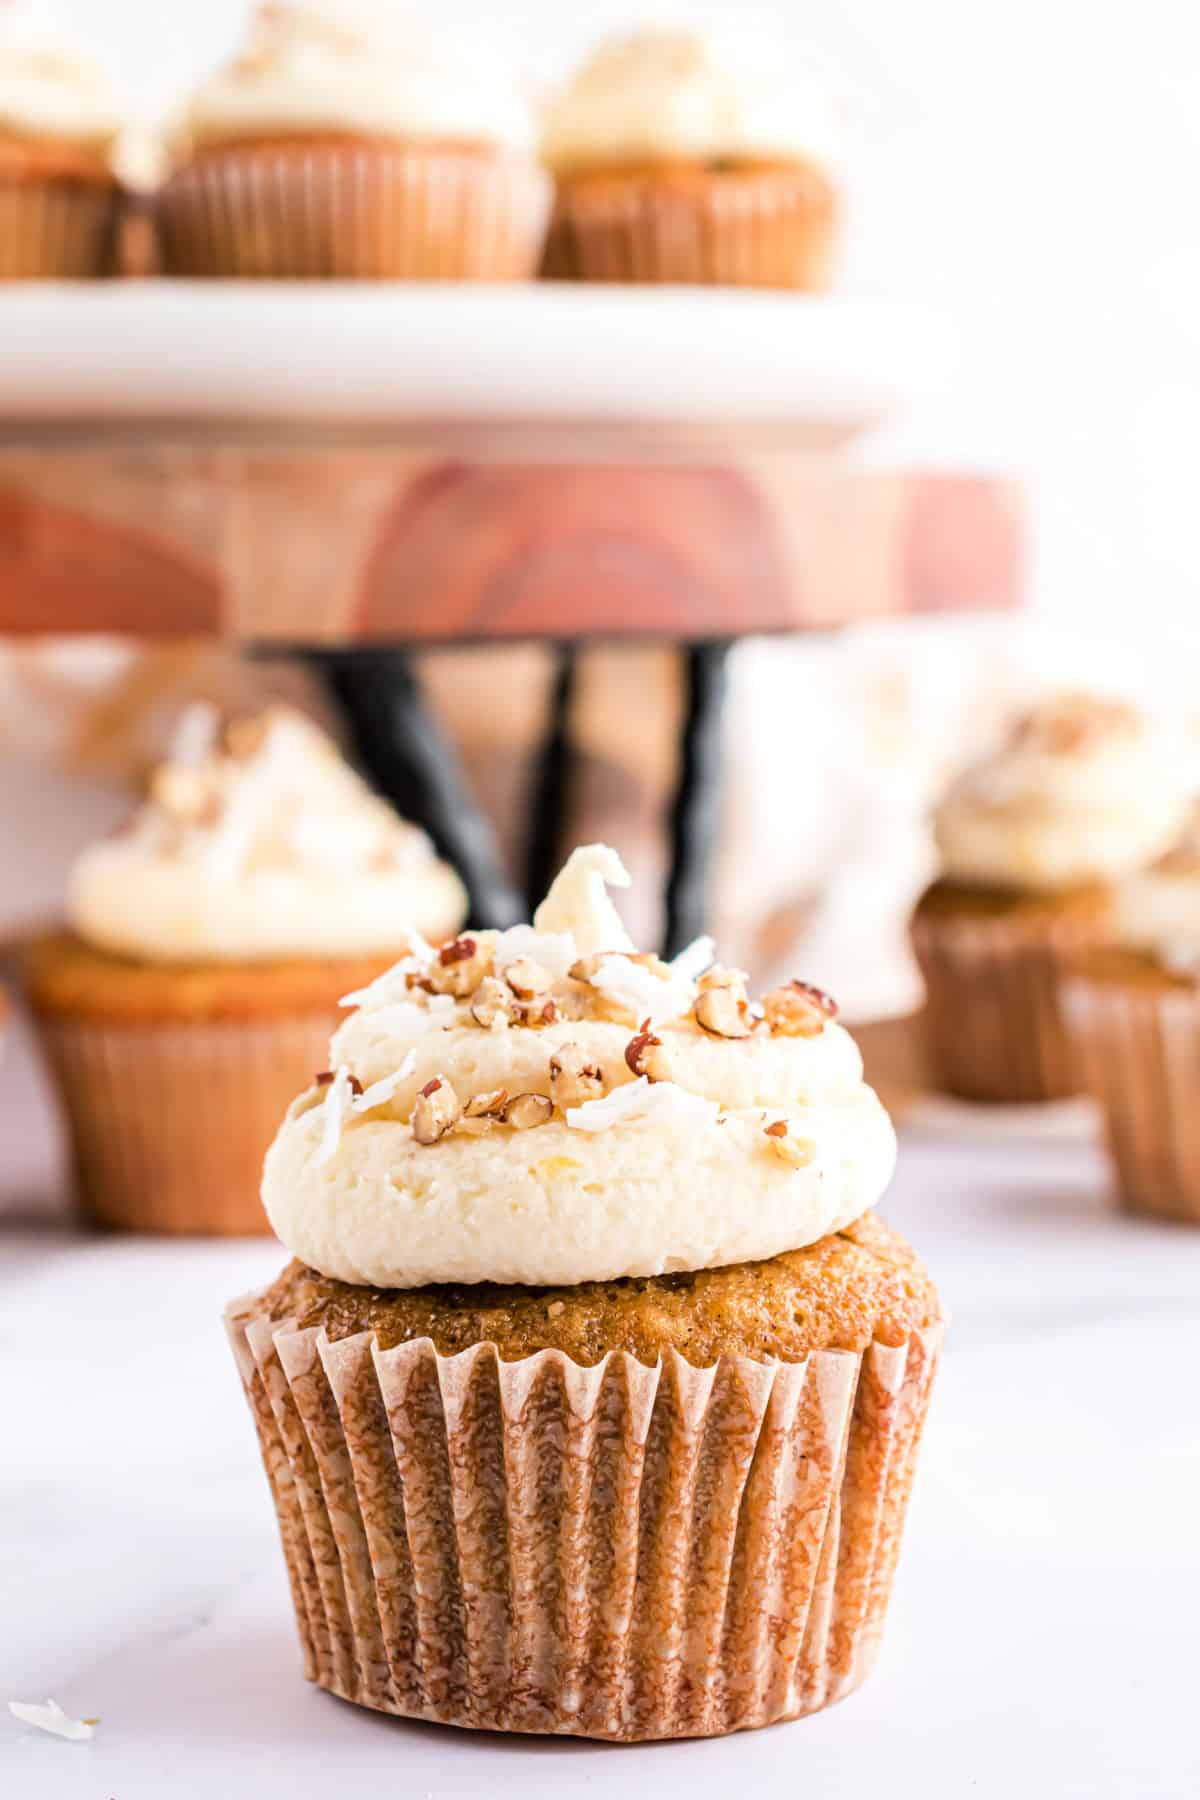 Hummingbird cupcake with cream cheese frosting and nuts.